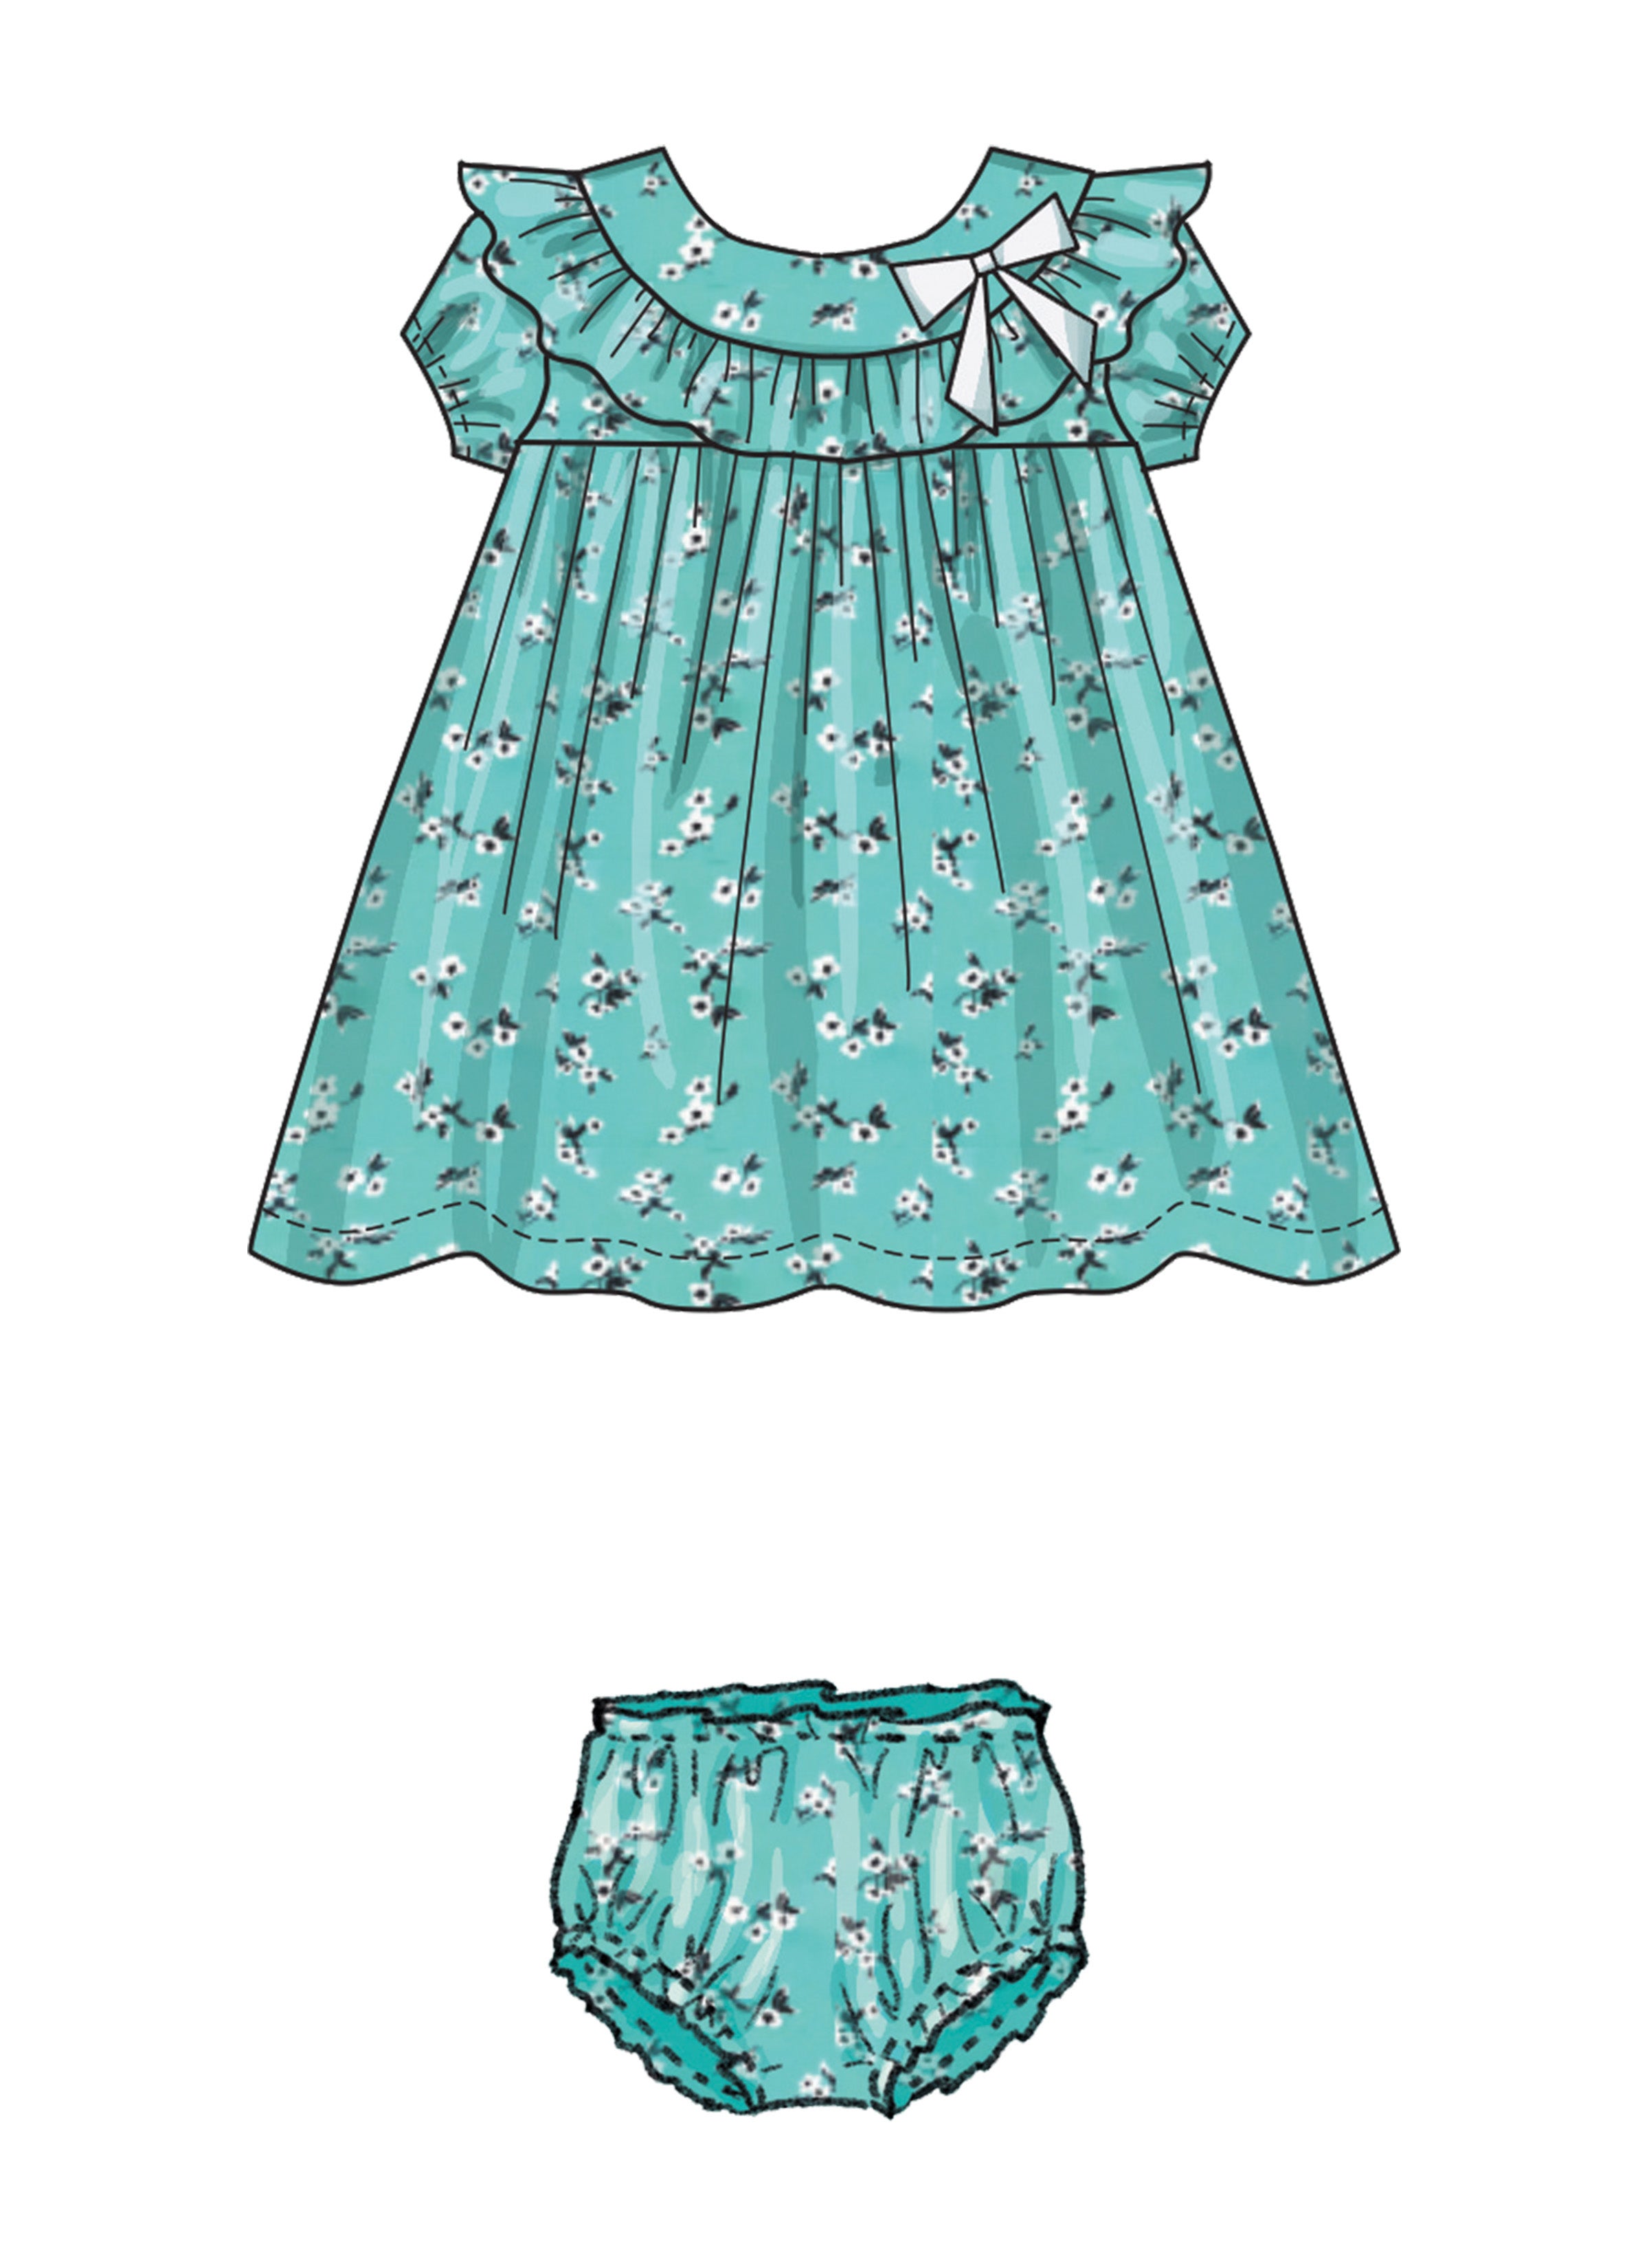 Butterick sewing pattern 6903 Infants' Dress and Panties from Jaycotts Sewing Supplies